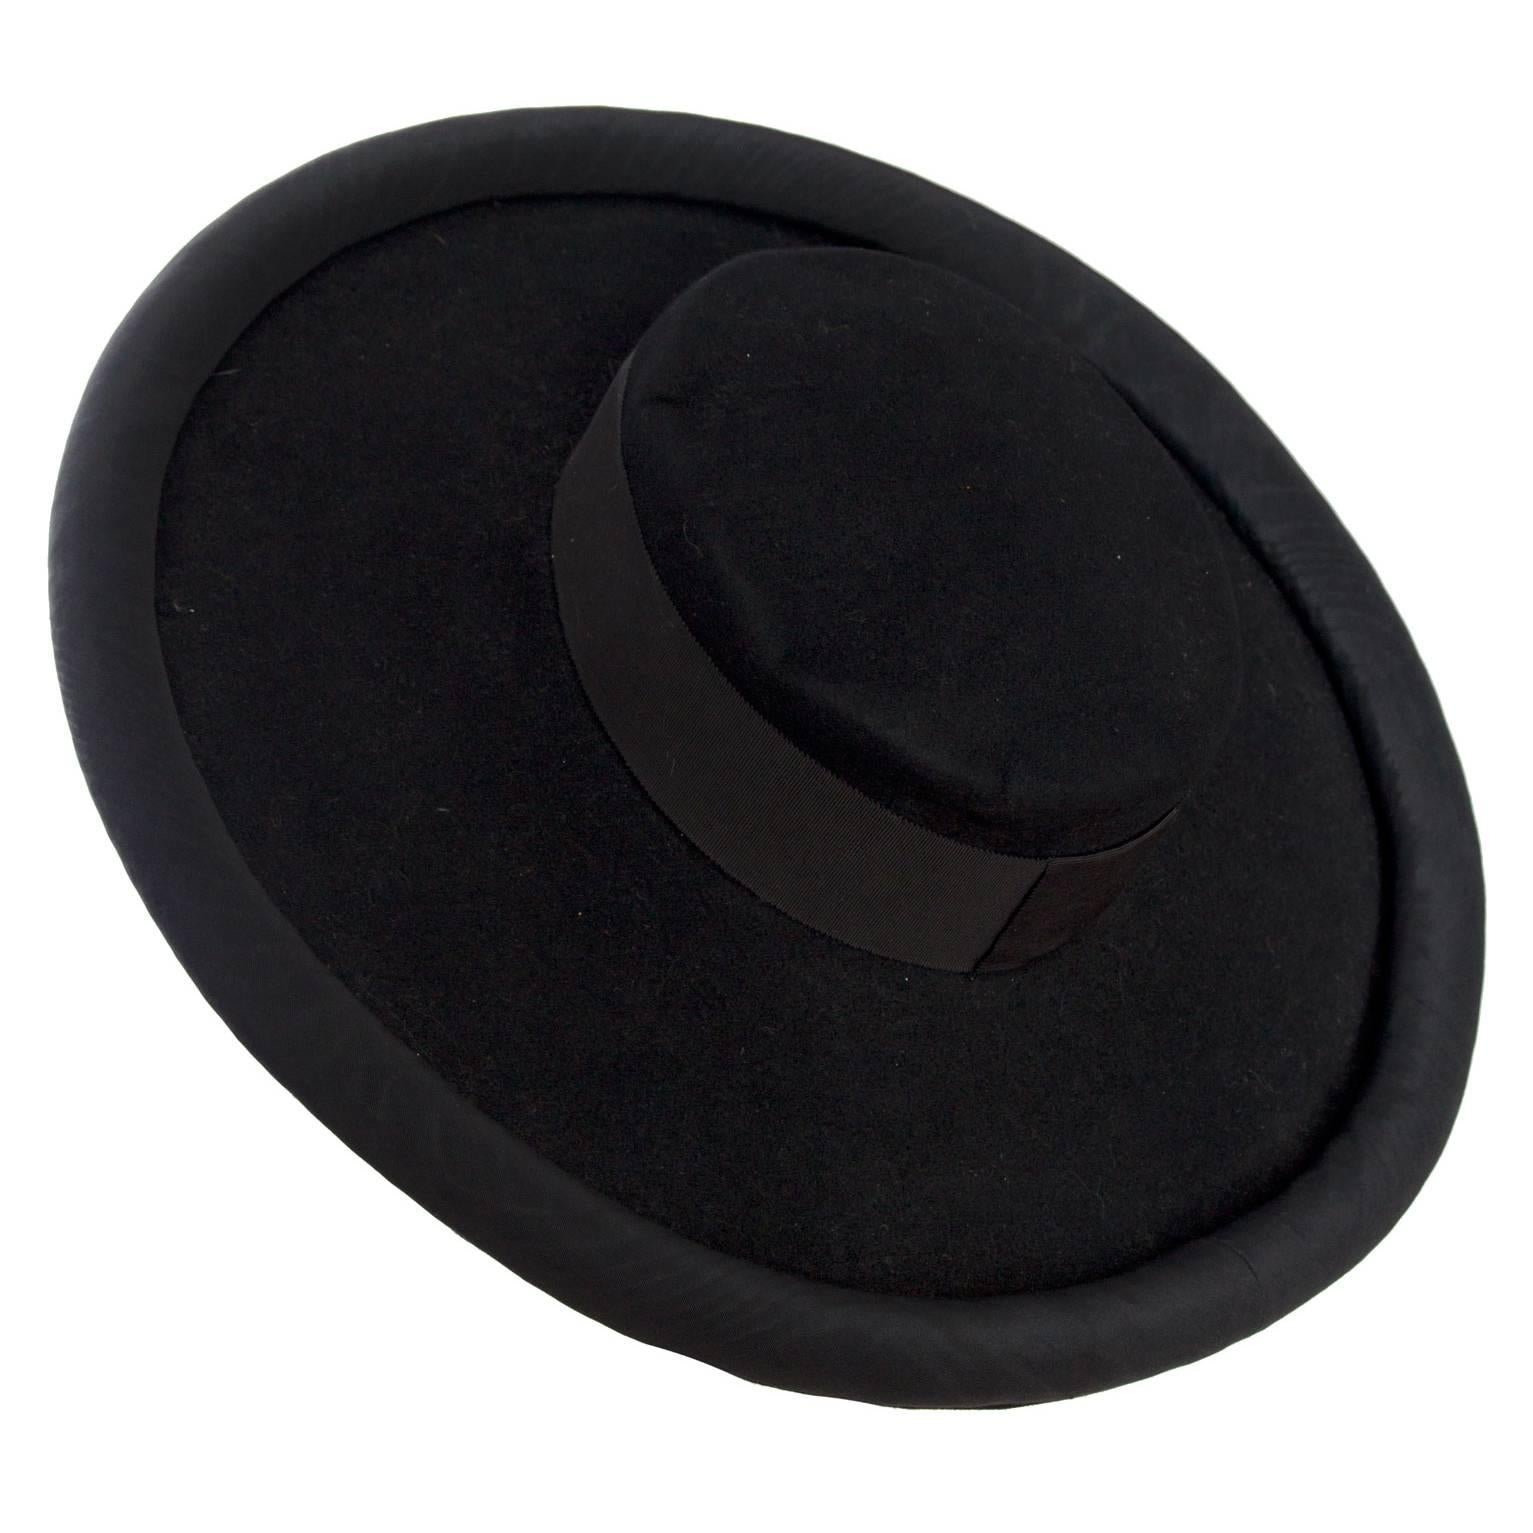 A 1980s black Yves Saint Laurent - Rive Gauche wide brimmed felt hat with a wide grosgrain bands and a round pipe style trim around the brim. A thin matching black ribbon can be tied around the chin. 

Model: A517
The hat is a size 56 1/2